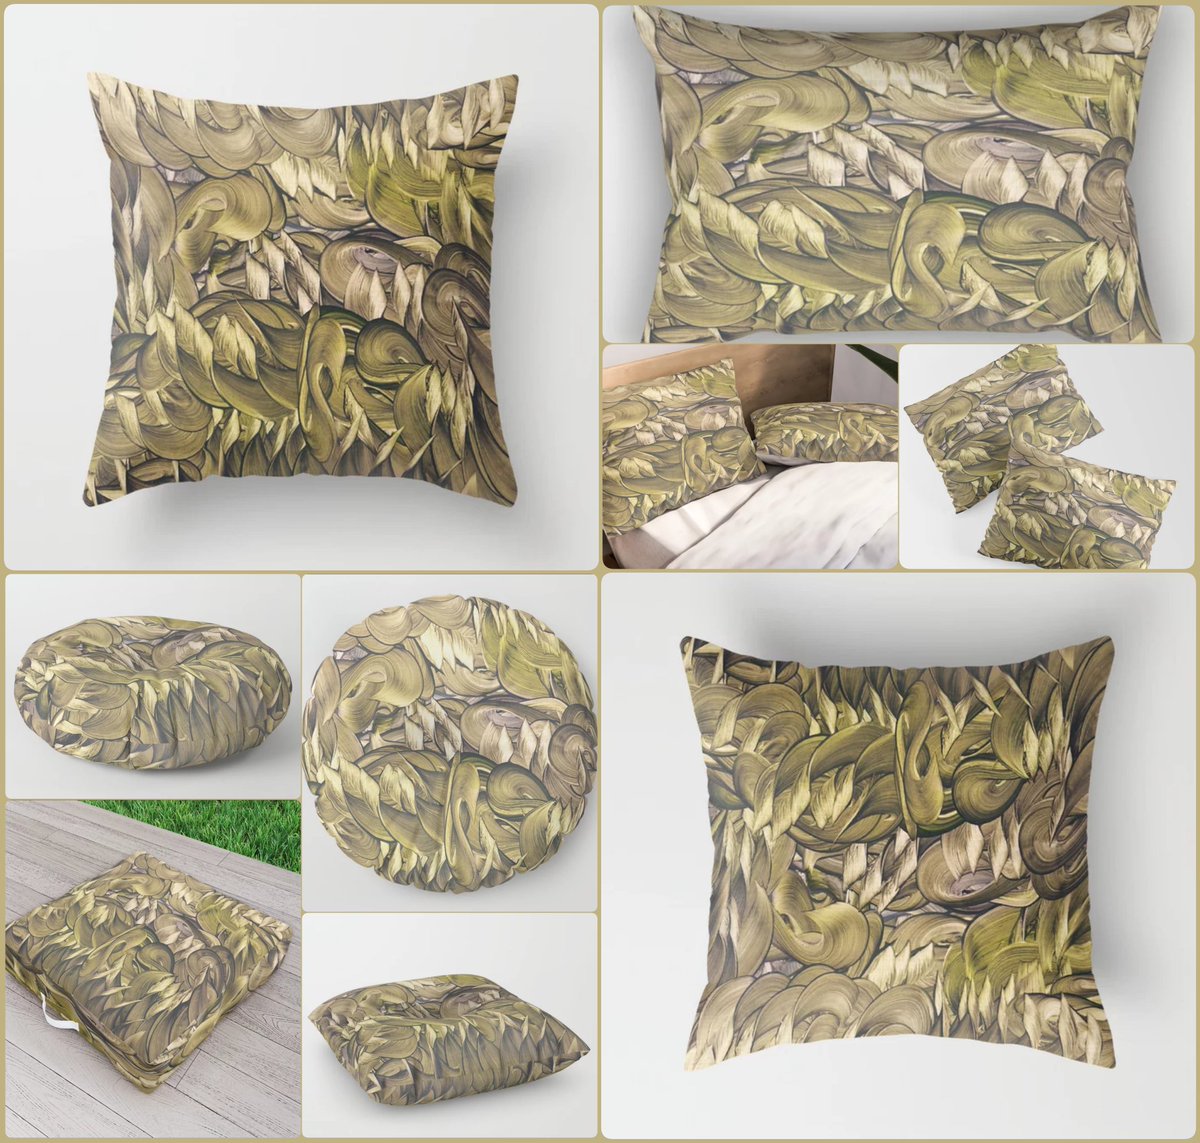 Victory Throw Pillow~by Art Falaxy~
~Unique Pillows!~
#artfalaxy #art #bedroom #pillows #homedecor #society6 #Society6max #swirls #modern #trendy #accessories #accents #floorpillows #pillows #shams #blankets

society6.com/product/victor…
COLLECTION: society6.com/art/victory198…